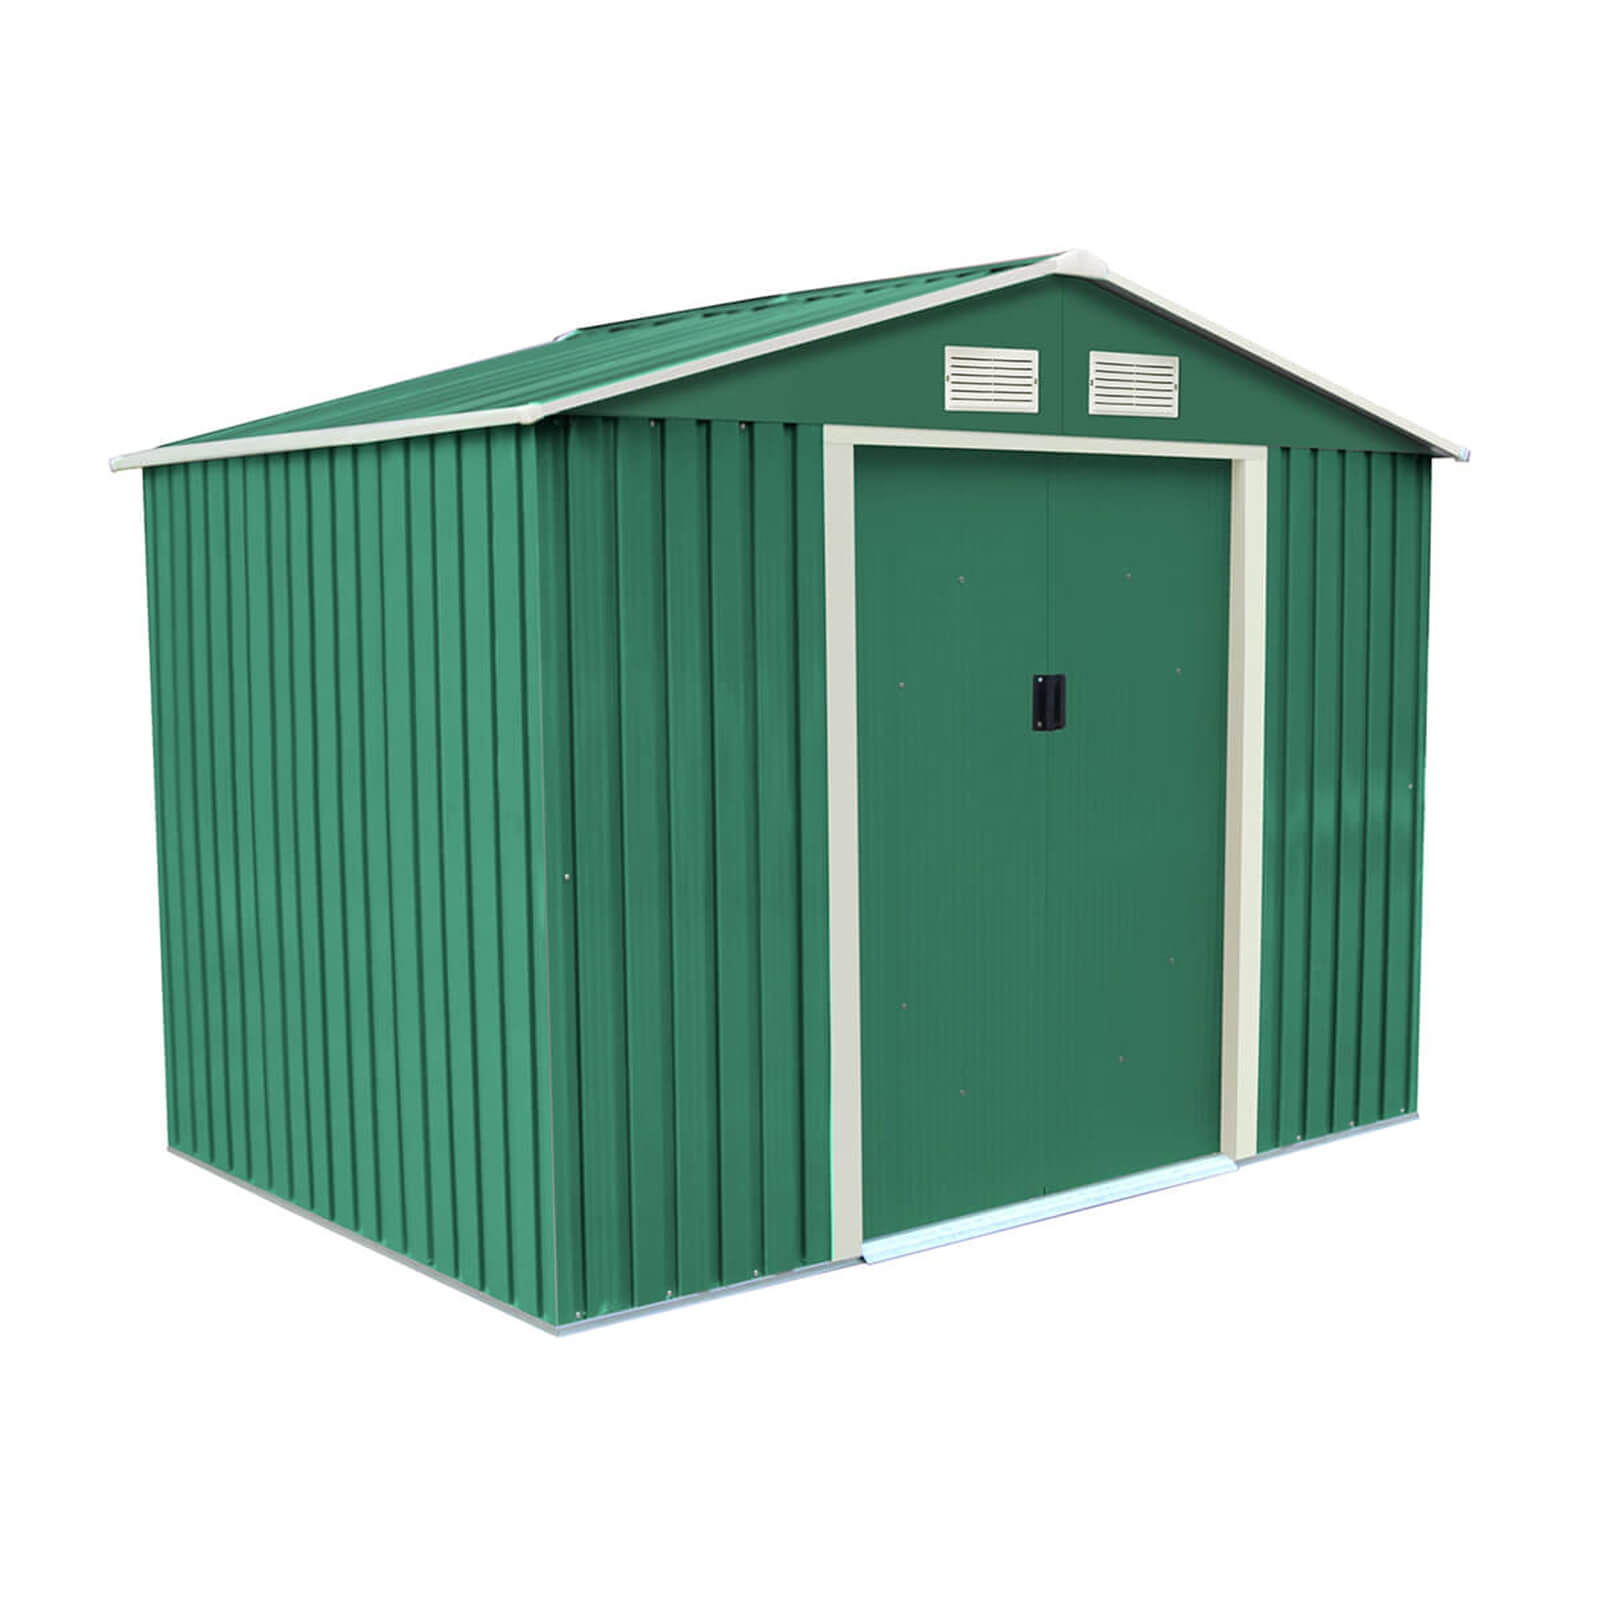 Charles Bentley 8ft x 6ft Green Metal Storage Shed with Zinc Floor Frame